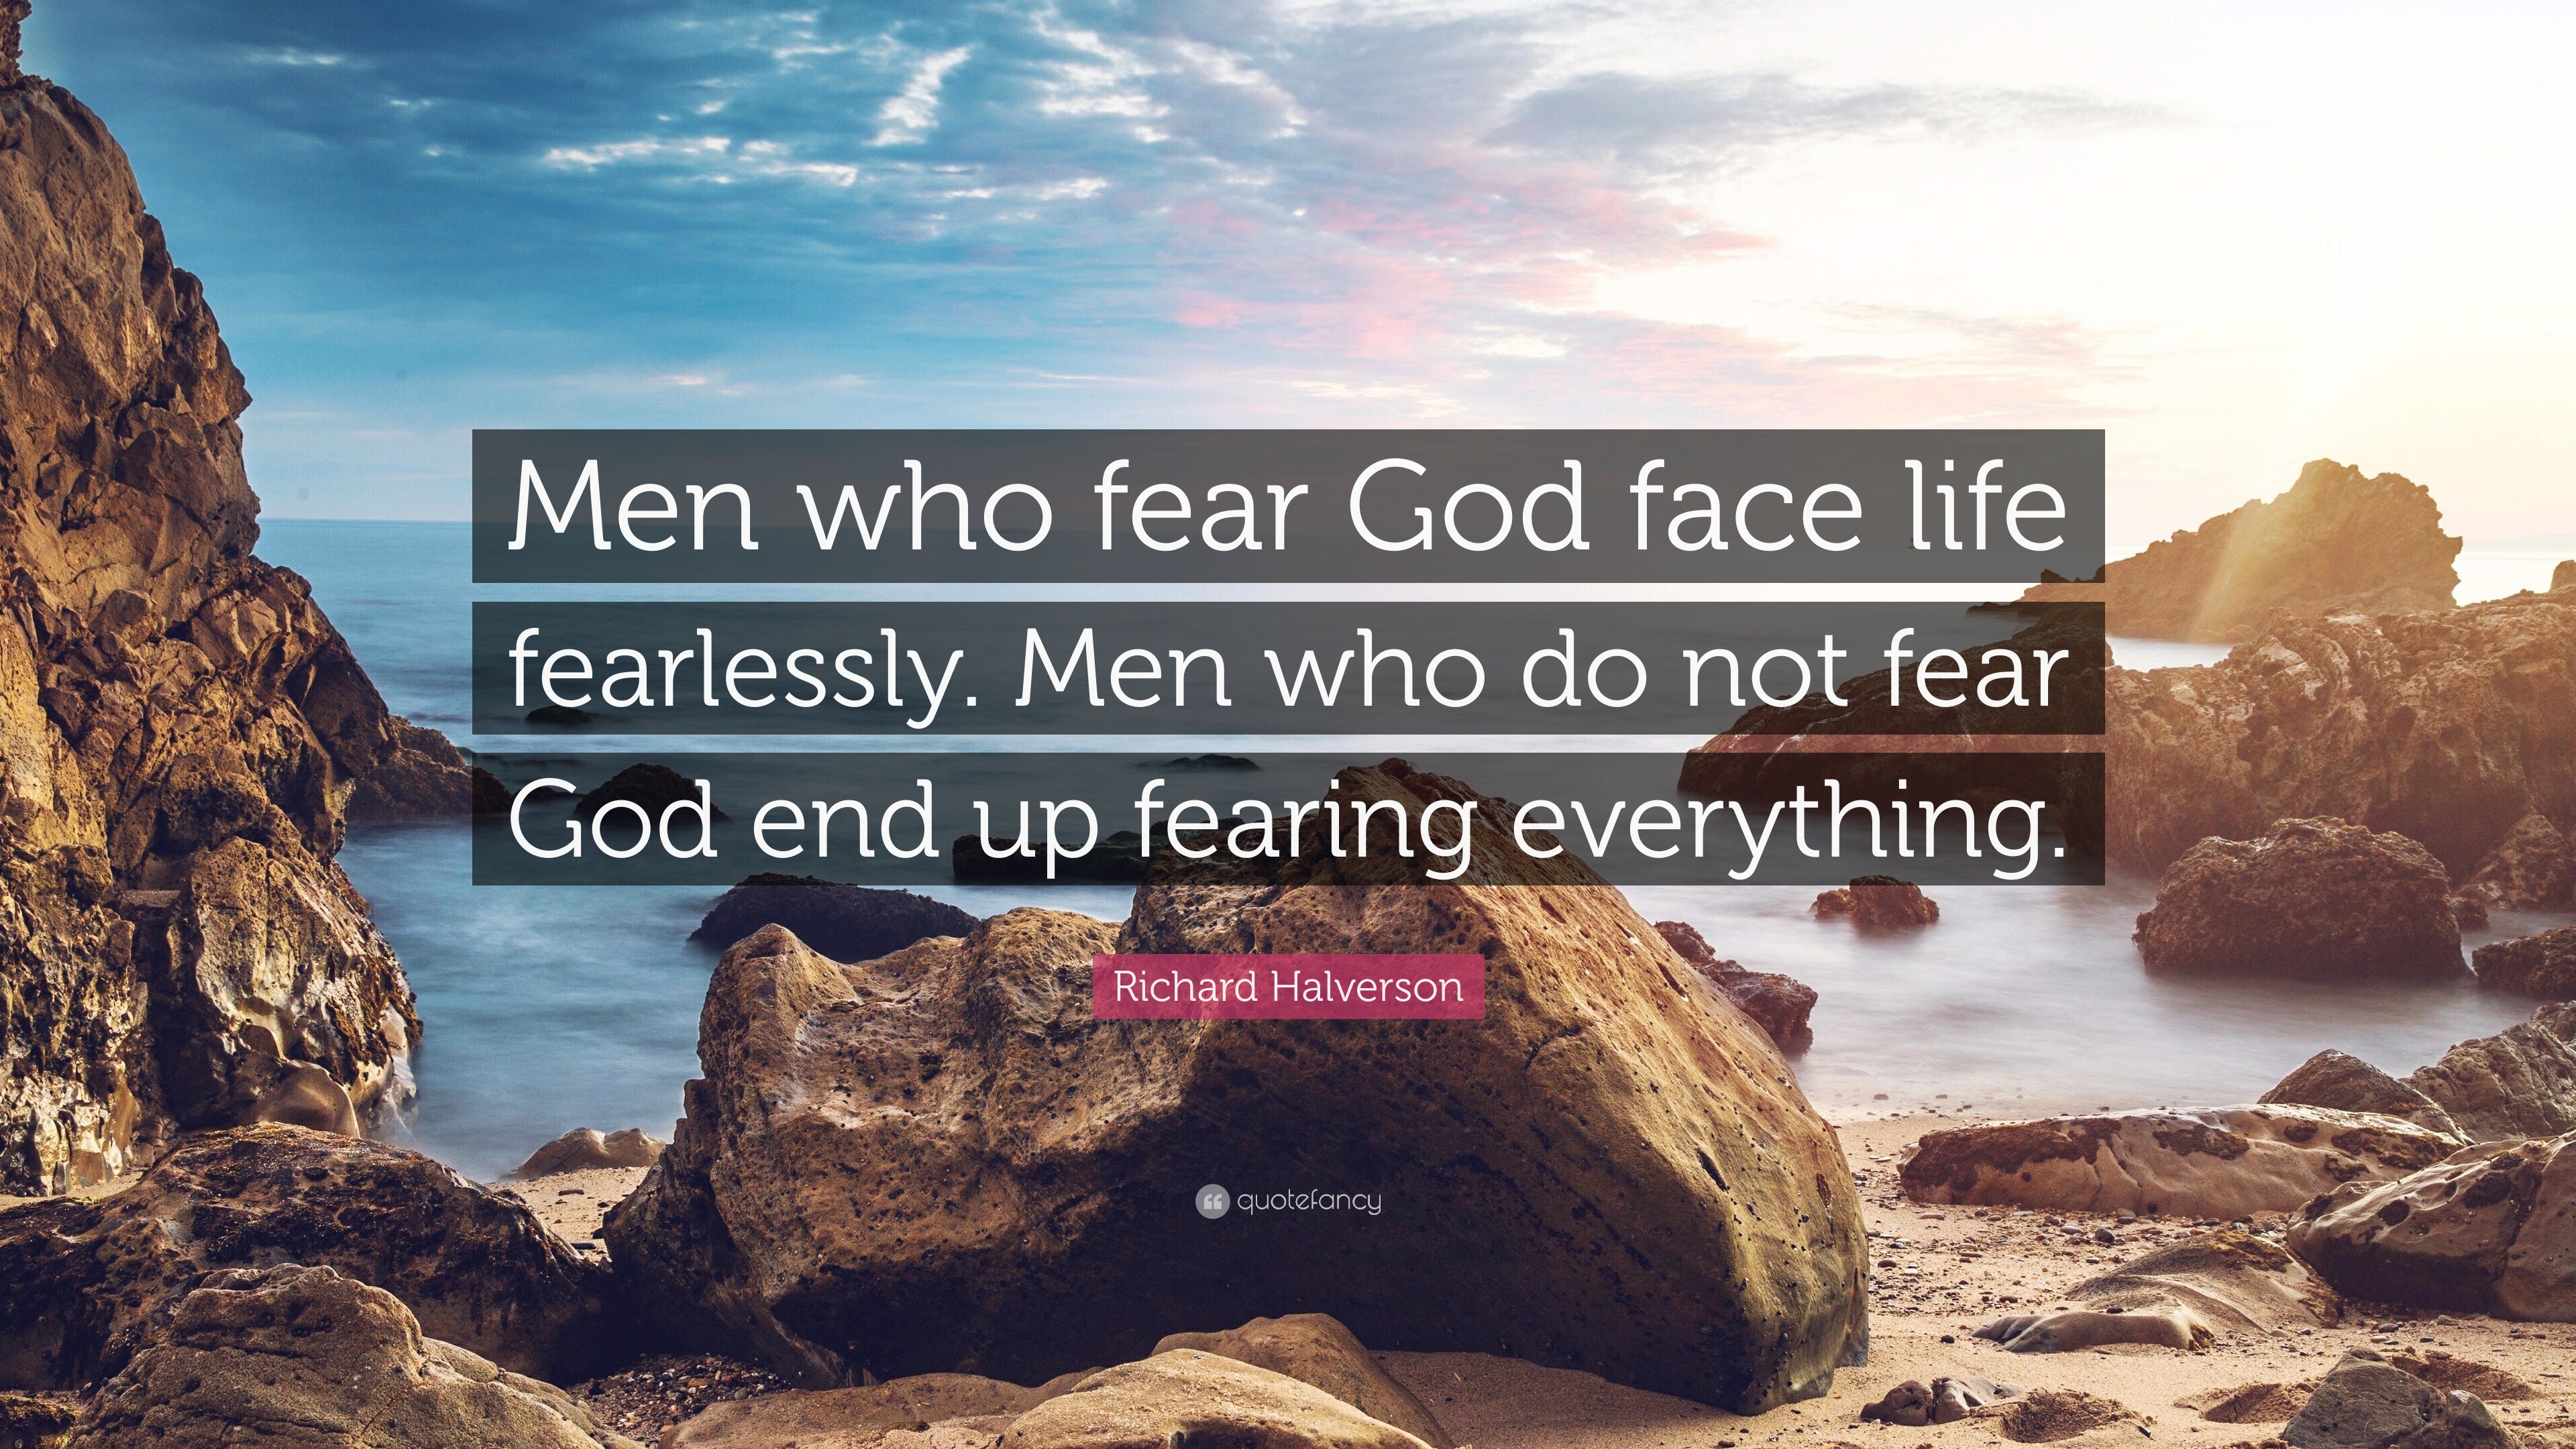 Richard Halverson Quote: “Men Who Fear God Face Life Fearlessly. Men Who Do Not Fear God